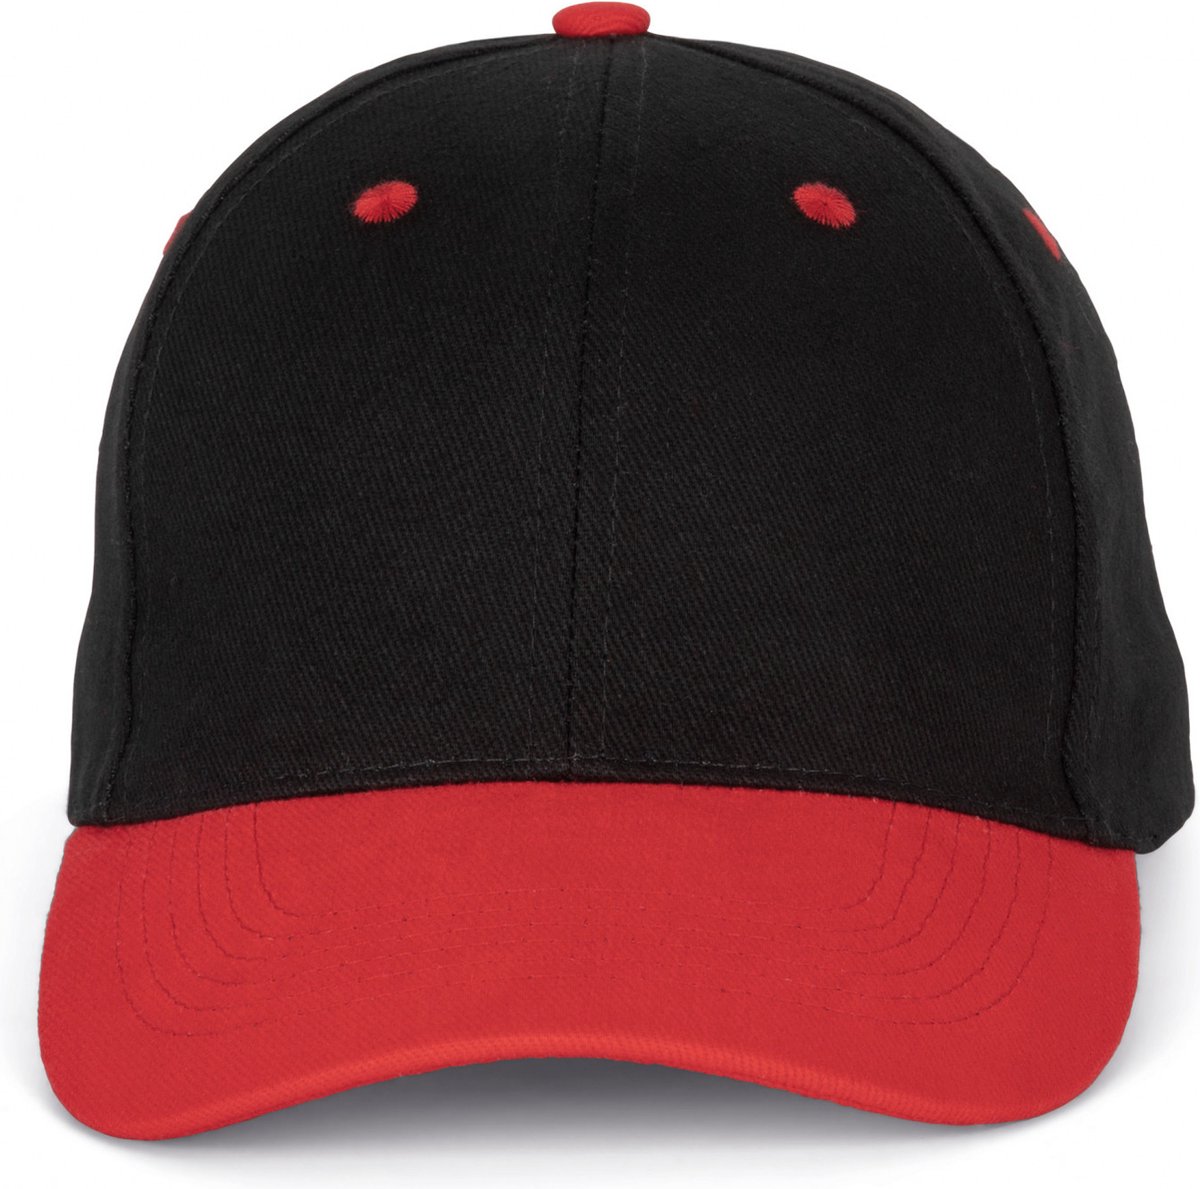 K-up 6 Panel Cap Black / Red - One Size